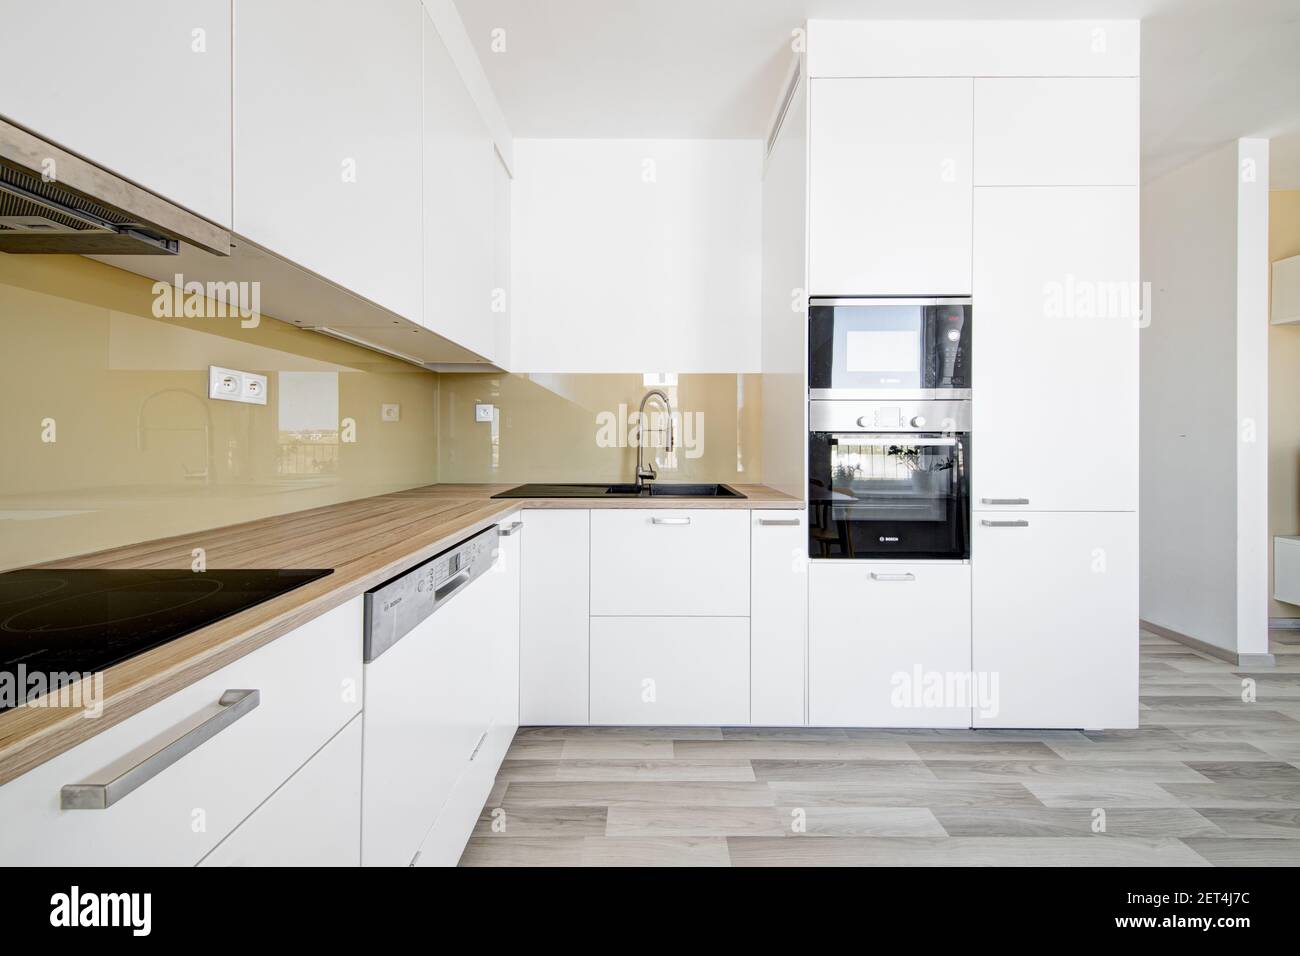 modern white kitchen with built-in appliances Stock Photo